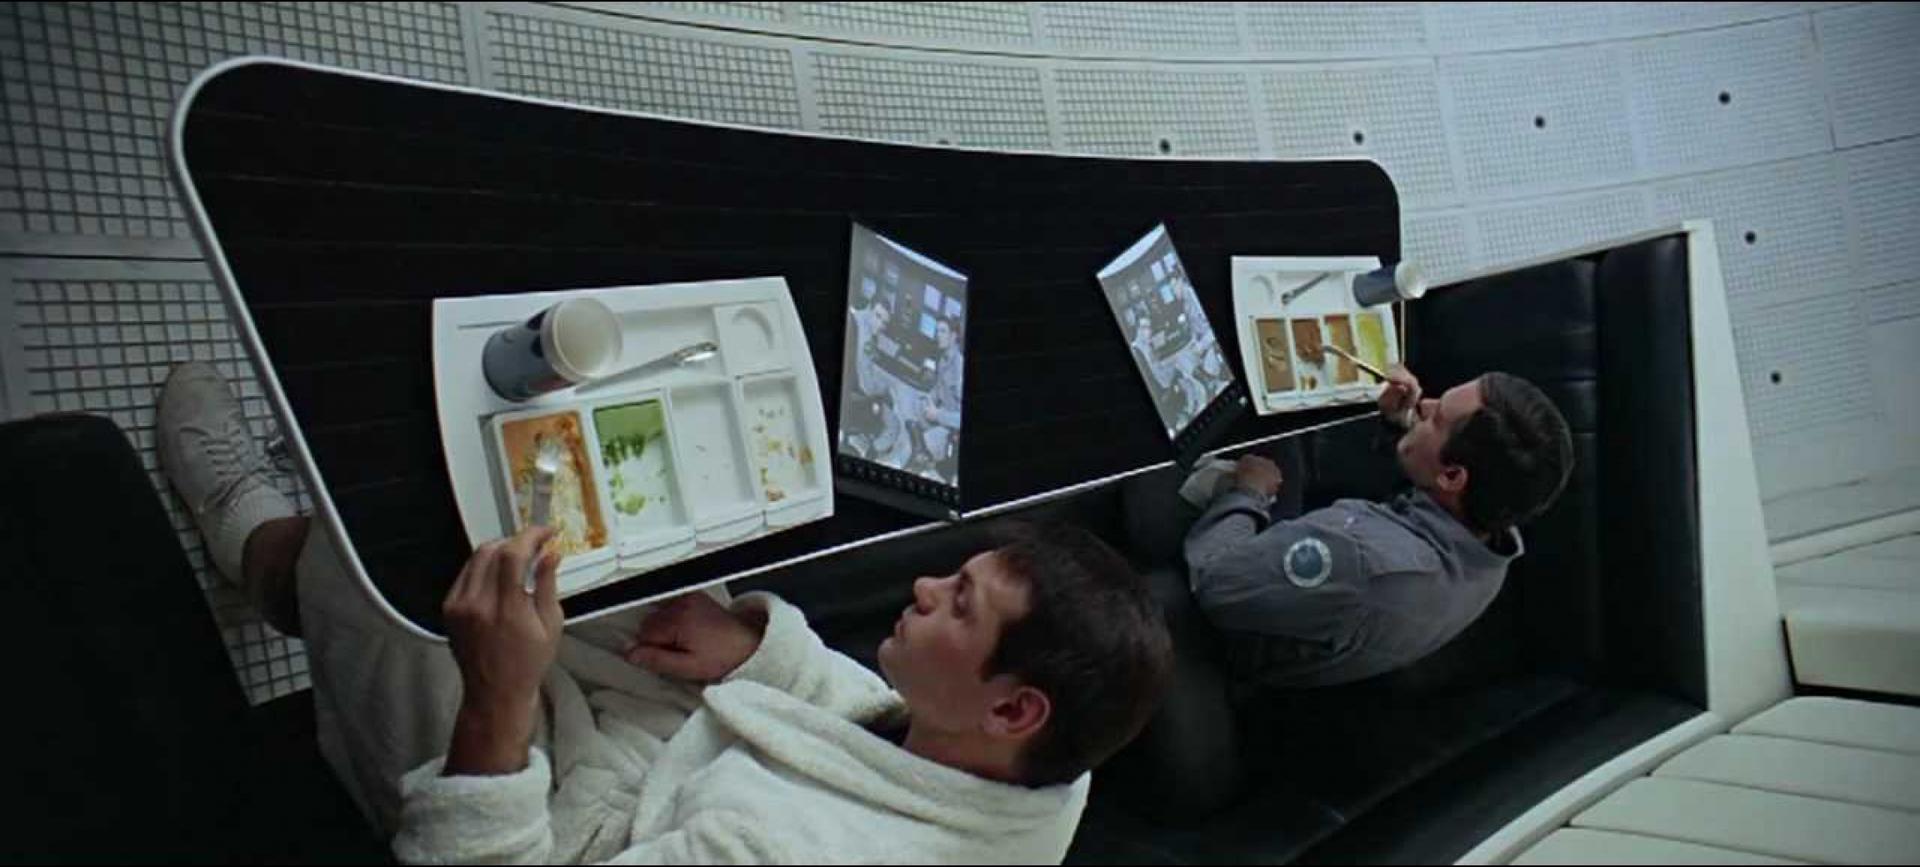 Dr. Francis Poole and Commander David Bowman watch a news segment about their mission on iPad-like screens in Stanley Kubrick’s “2001: A Space Odyssey.”